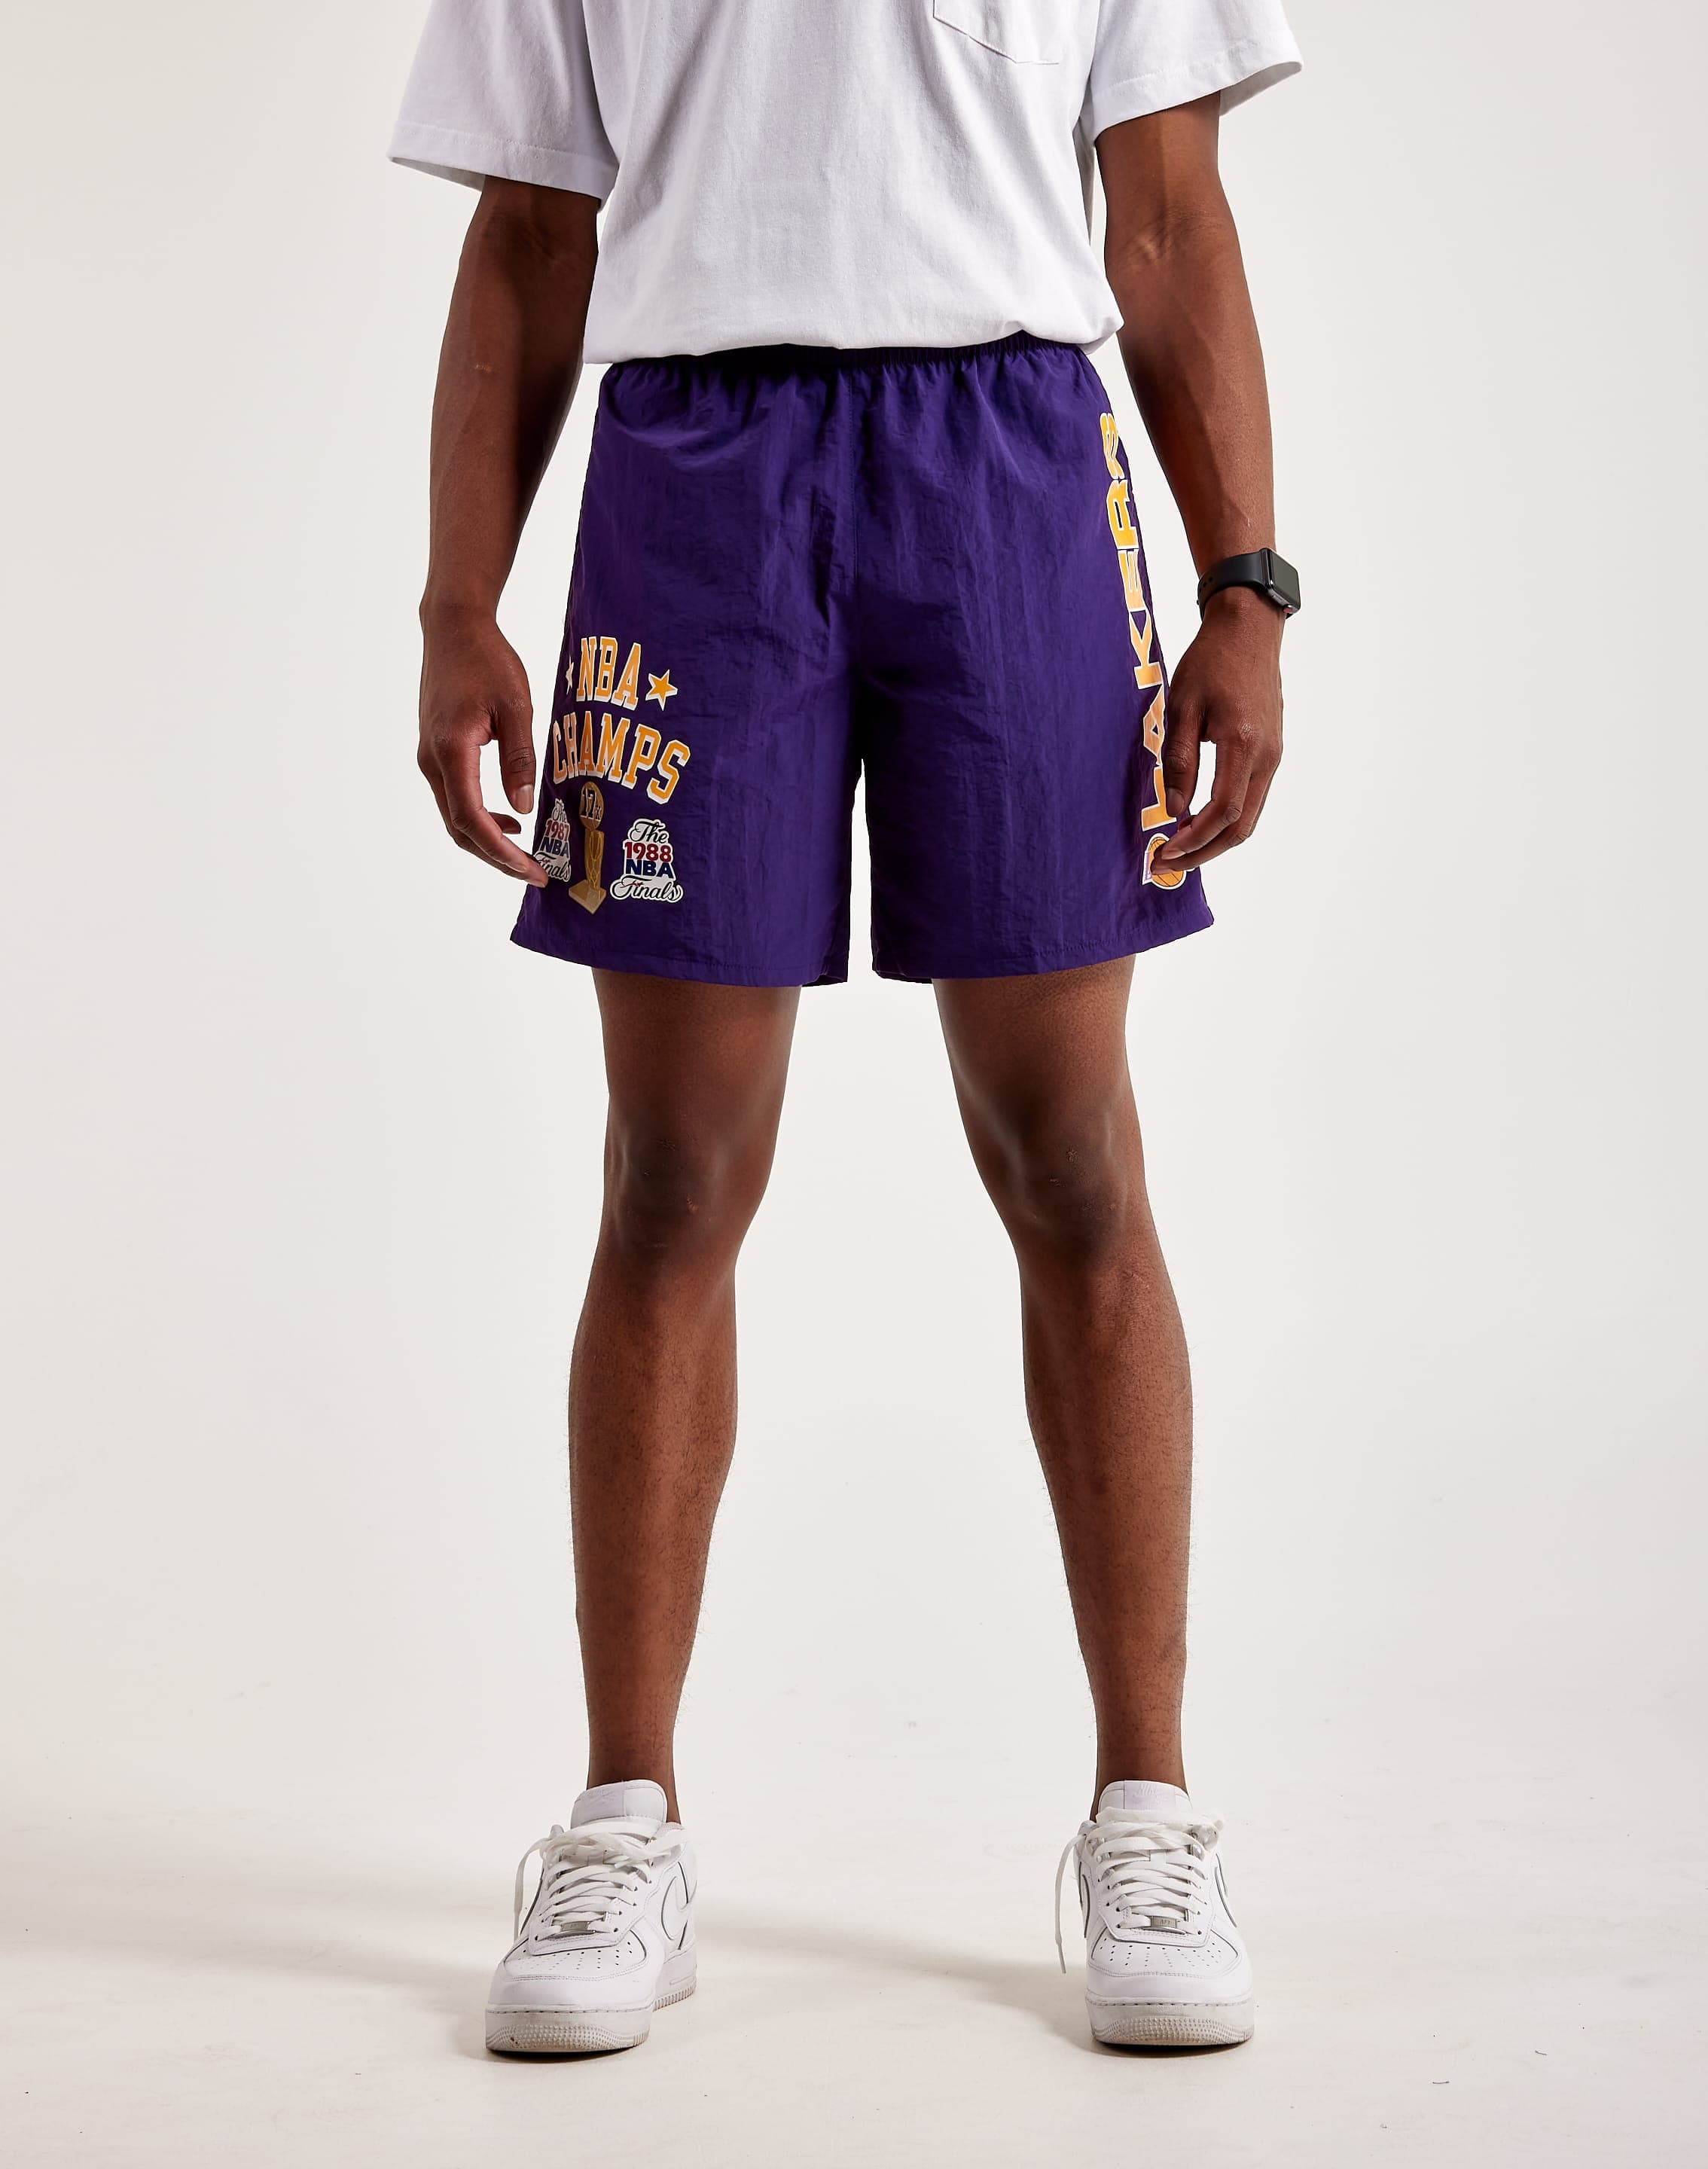 MITCHELL AND NESS Lakers Game Day Tribal Pattern Shorts  PSHR4837-LALYYPPPMTBK - Shiekh